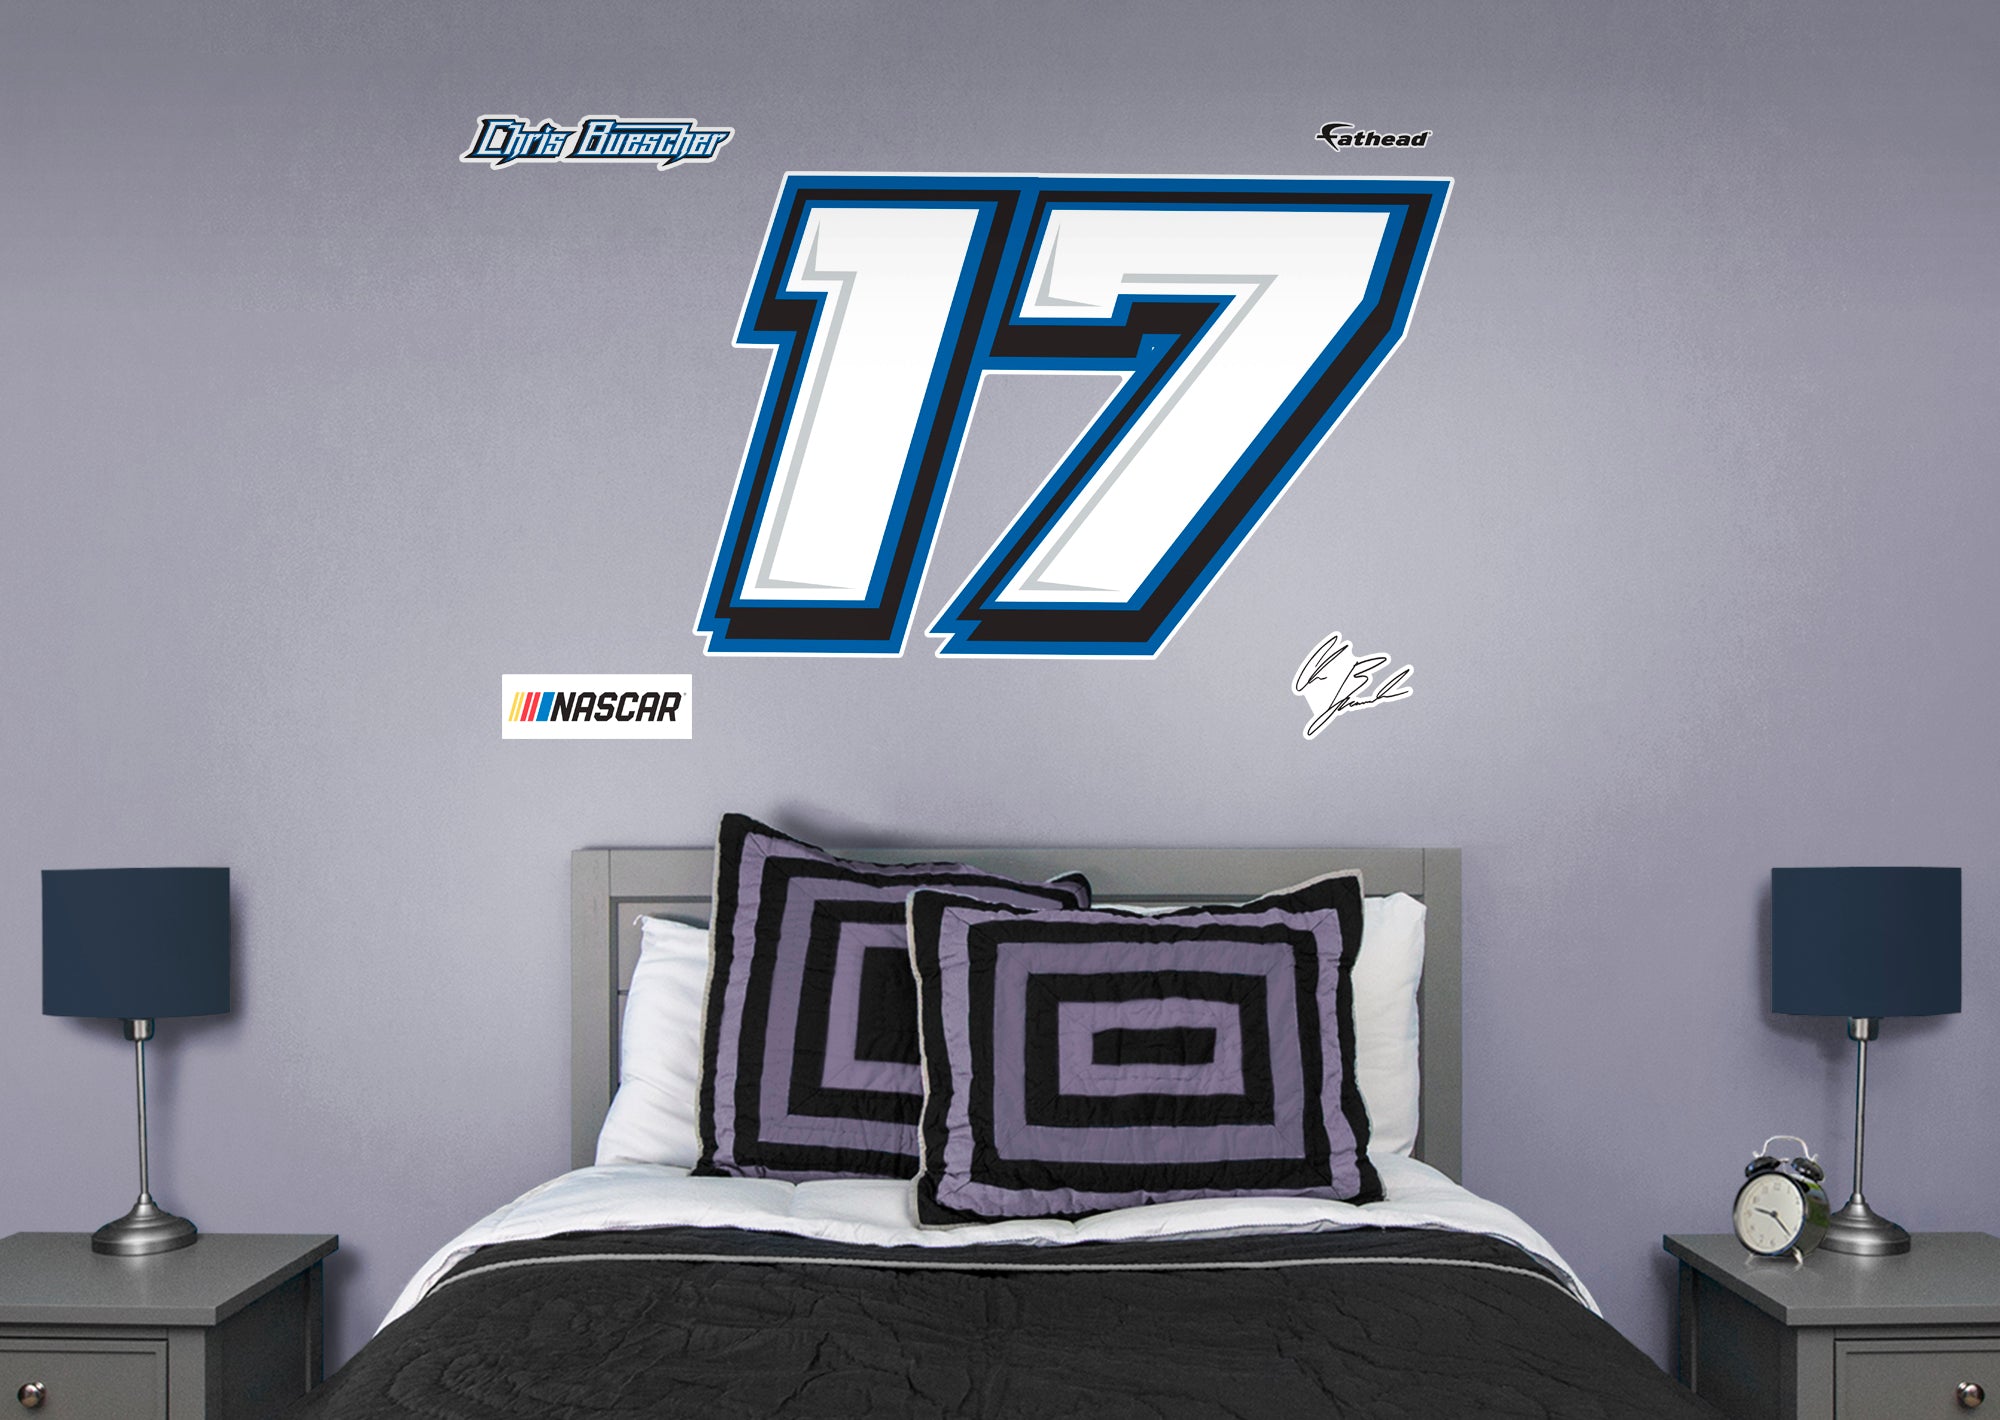 Chris Buescher 2021 #17 Logo - Officially Licensed NASCAR Removable Wall Decal Giant Logo + 4 Decals (51"W x 33"H) by Fathead |